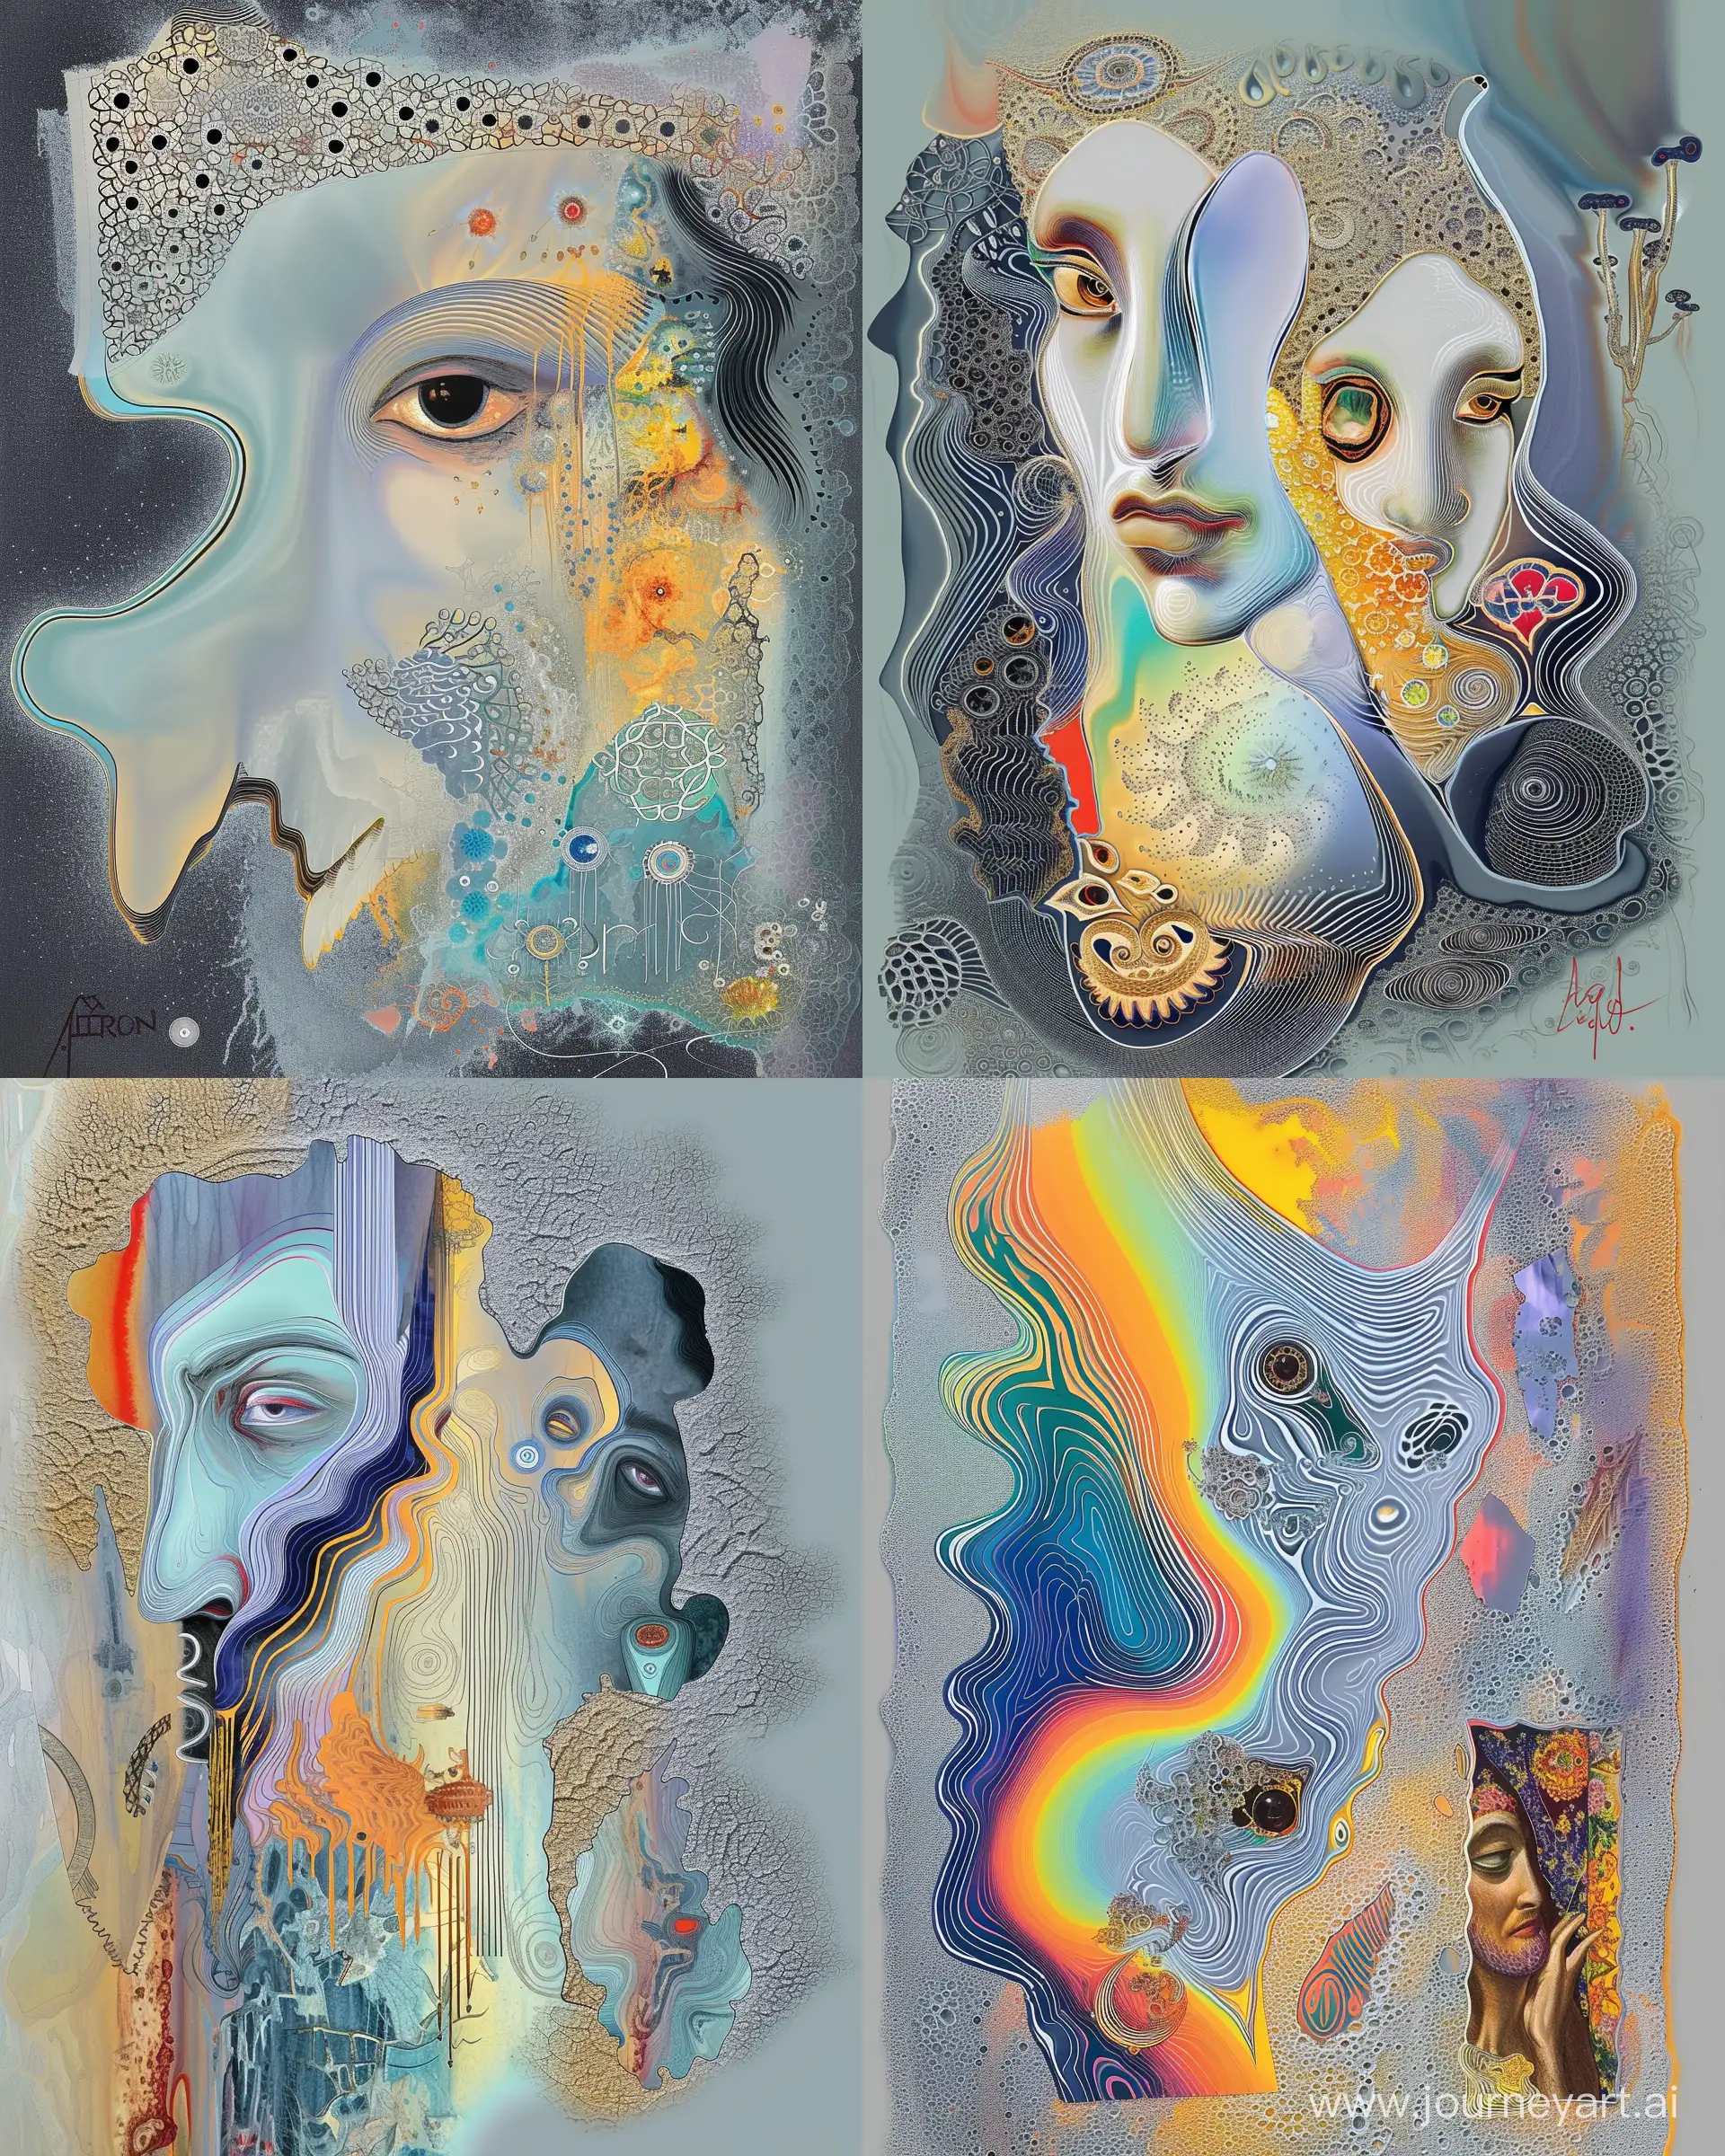 https://i.postimg.cc/CxpBrNjf/photo-2024-02-03-14-51-02.jpg, abstract atmosphere with Wavy line technique and persian miniature portraits, invert colors, surrealism  --ar 4:5